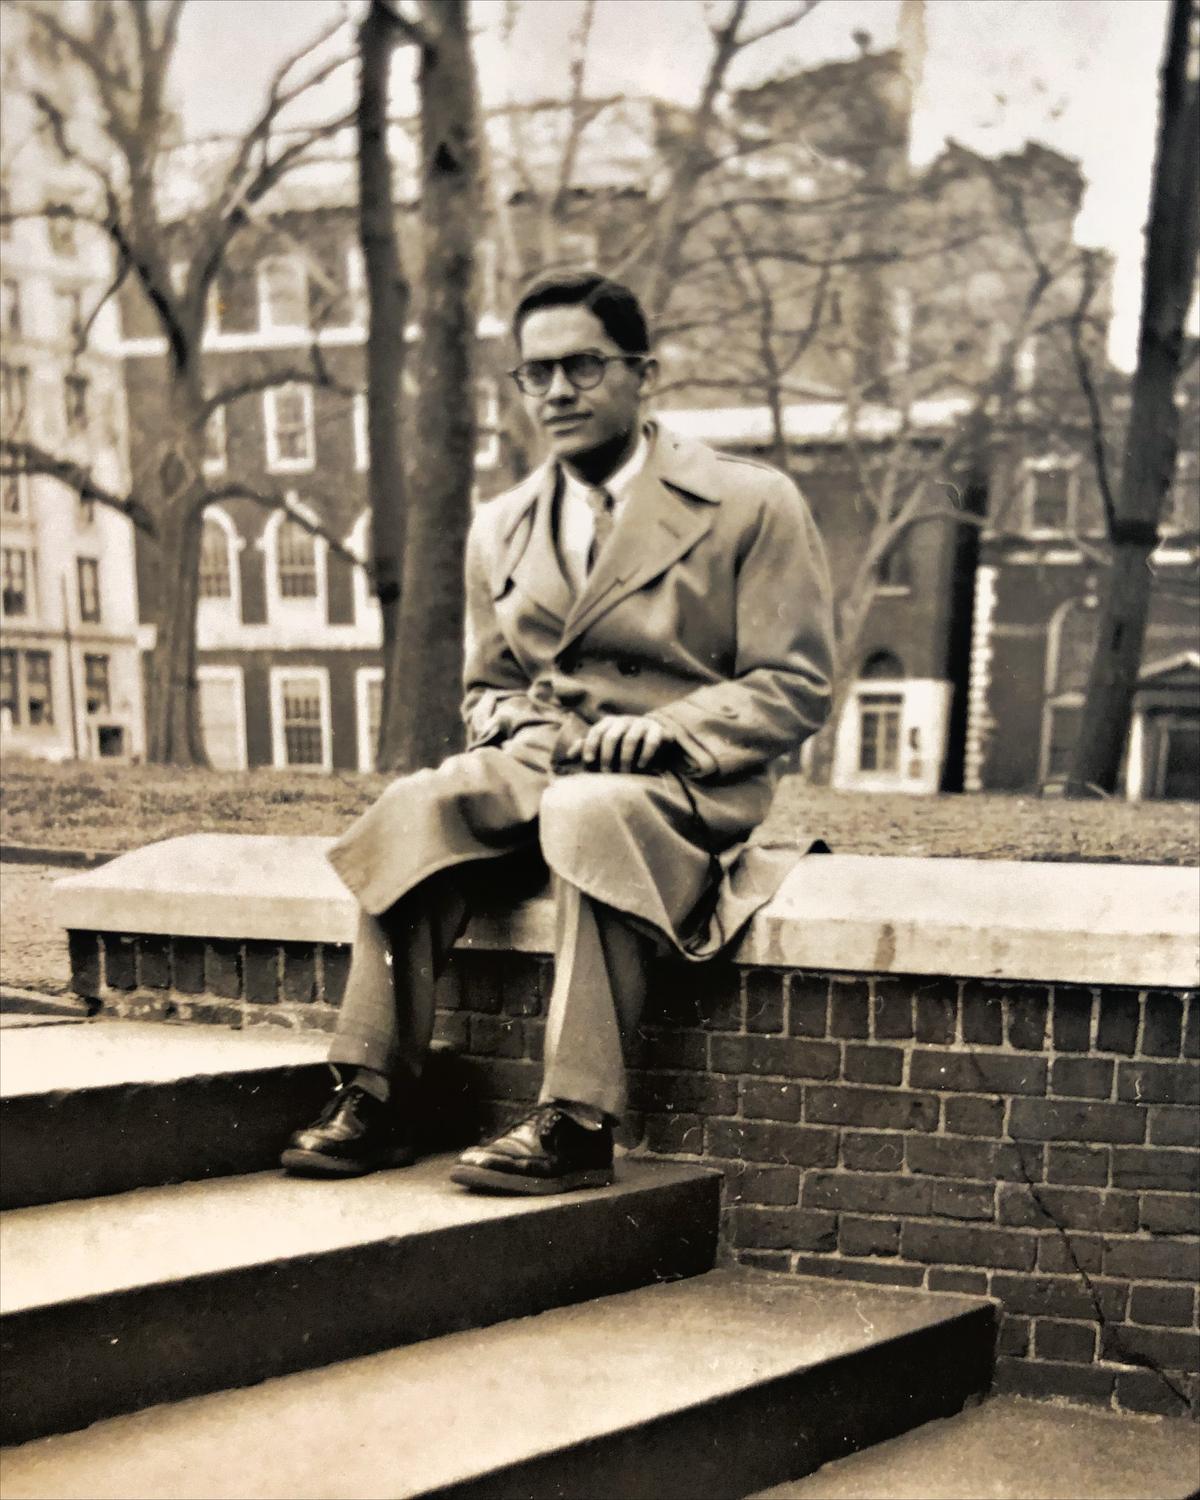 The author's father, Cesar Colon-Bonet, as a medical student at Thomas Jefferson Medical College in Philadelphia, winter of 1954. (Courtesy of Cara Colon-McLauchlan)